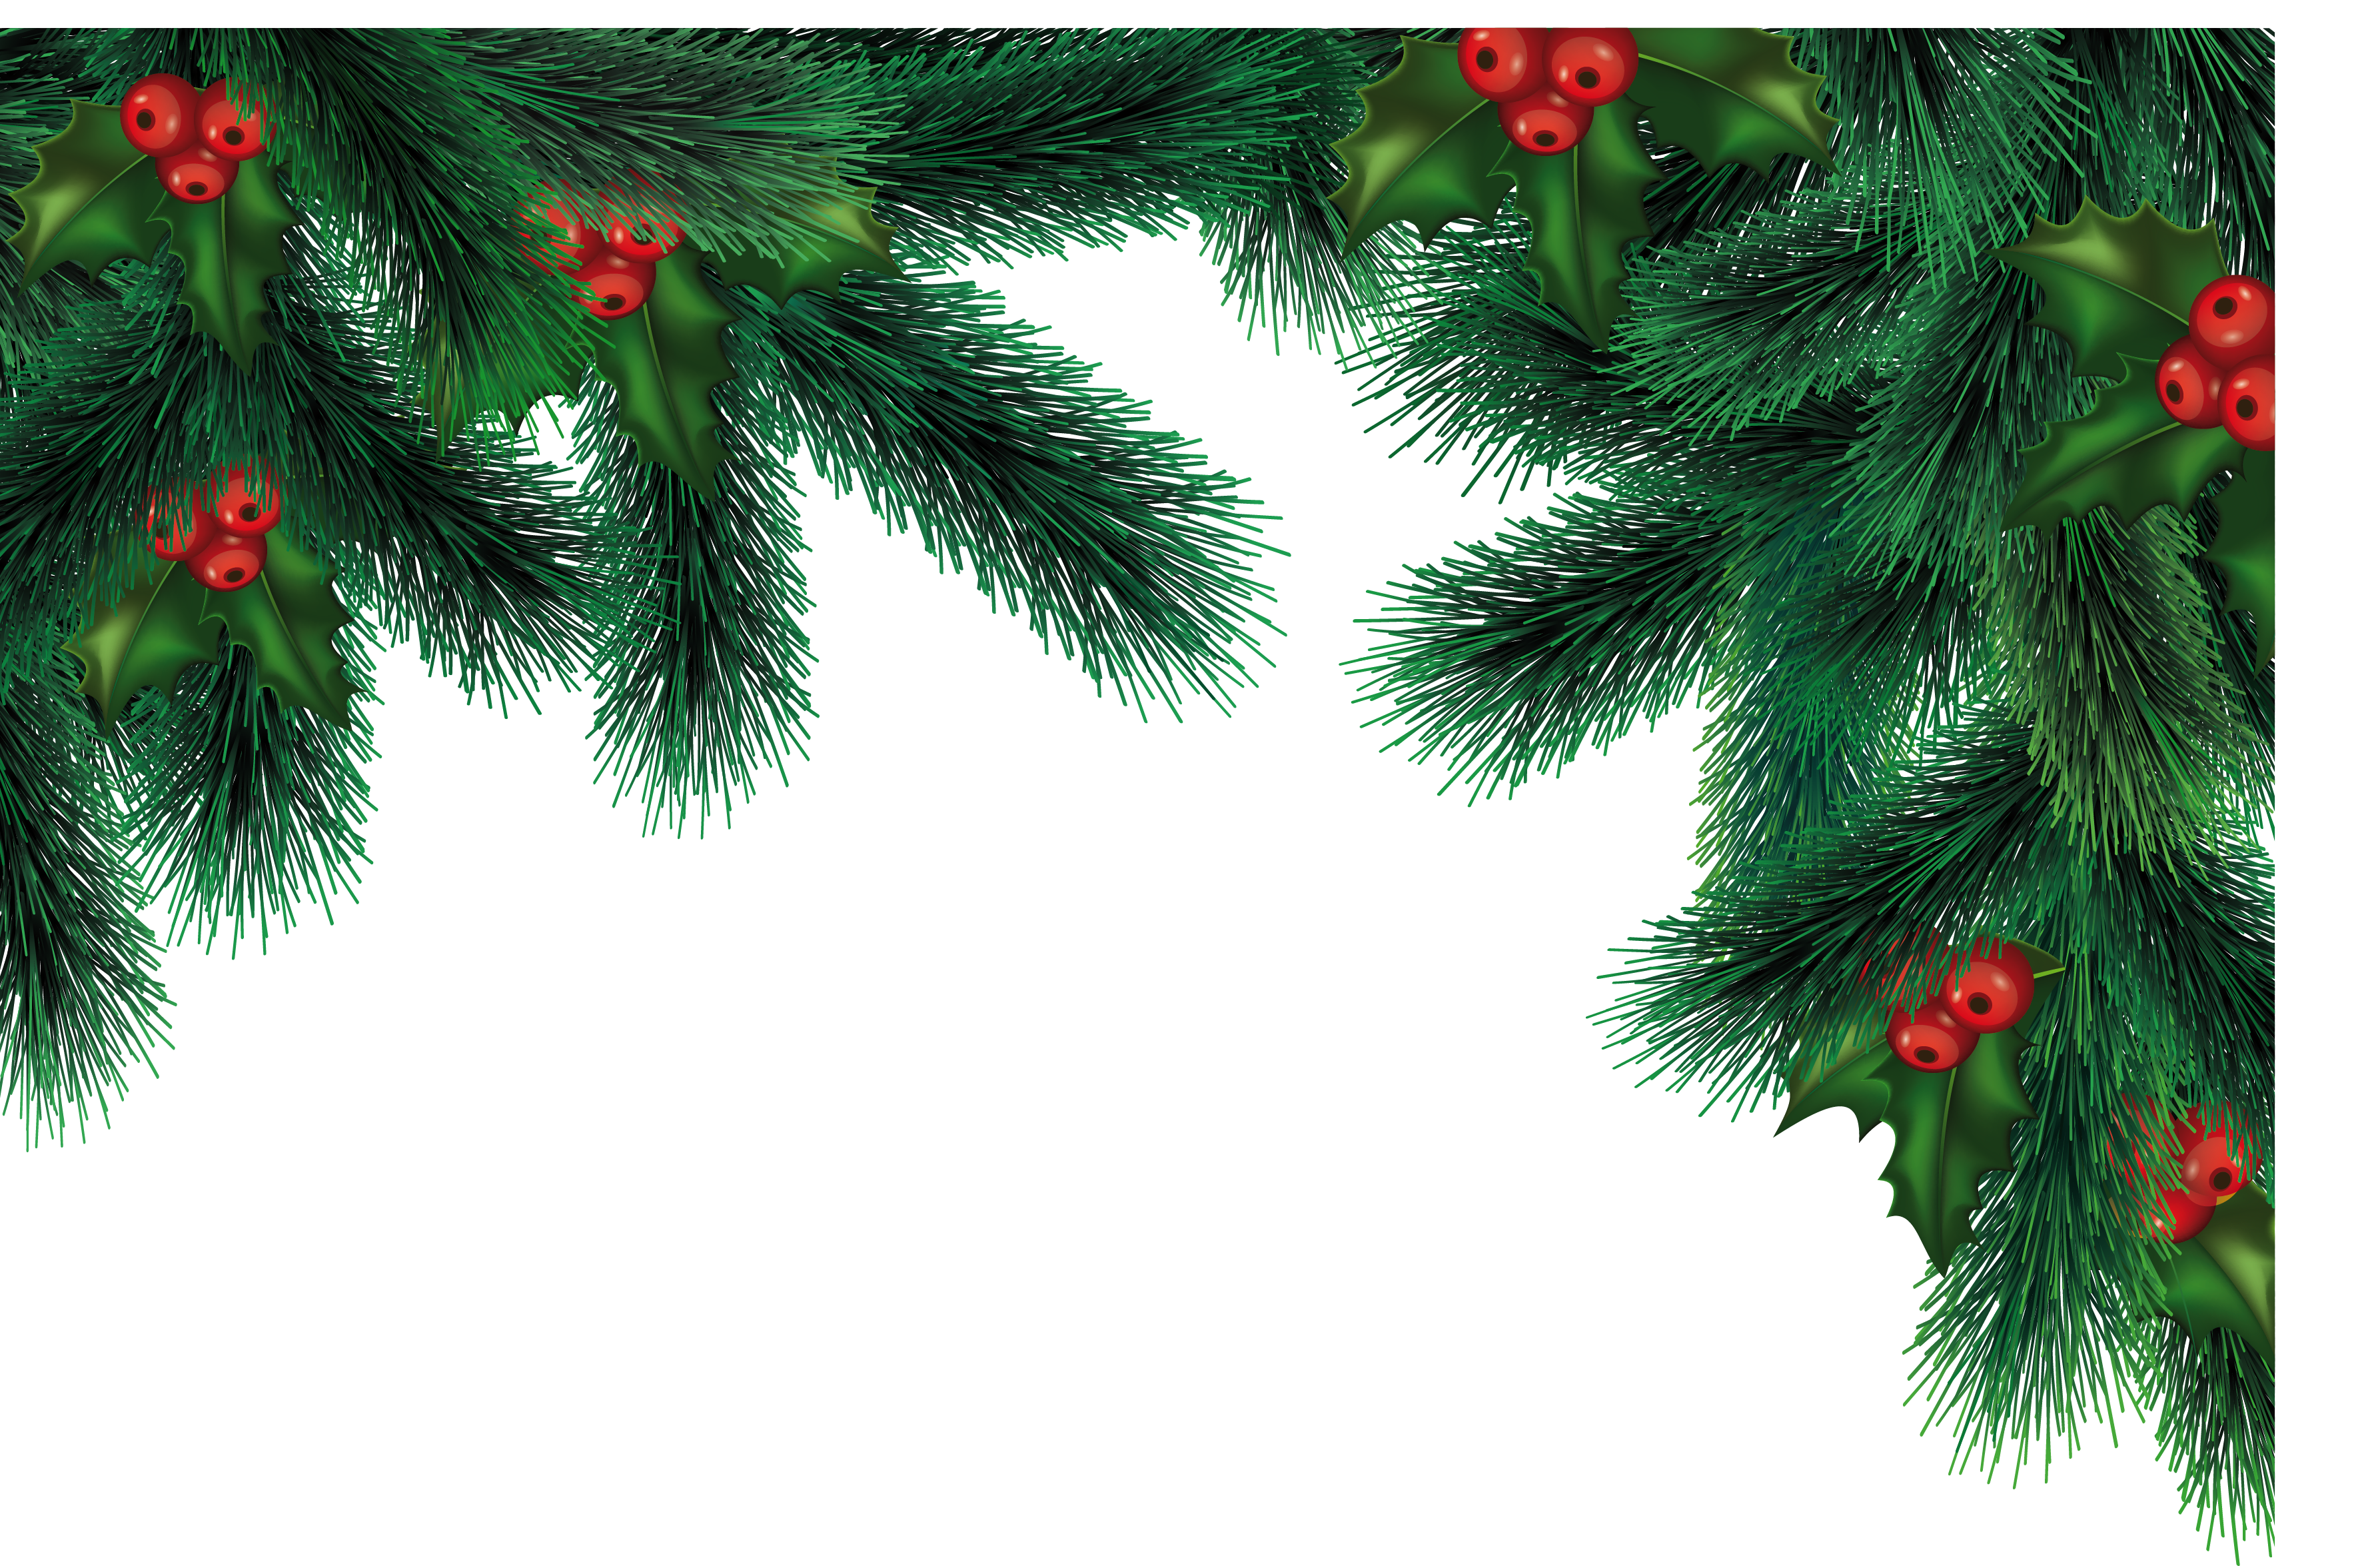 Gate educate Insulate Christmas Decoration Leaf Pictures PNG Transparent Background, Free  Download #47080 - FreeIconsPNG